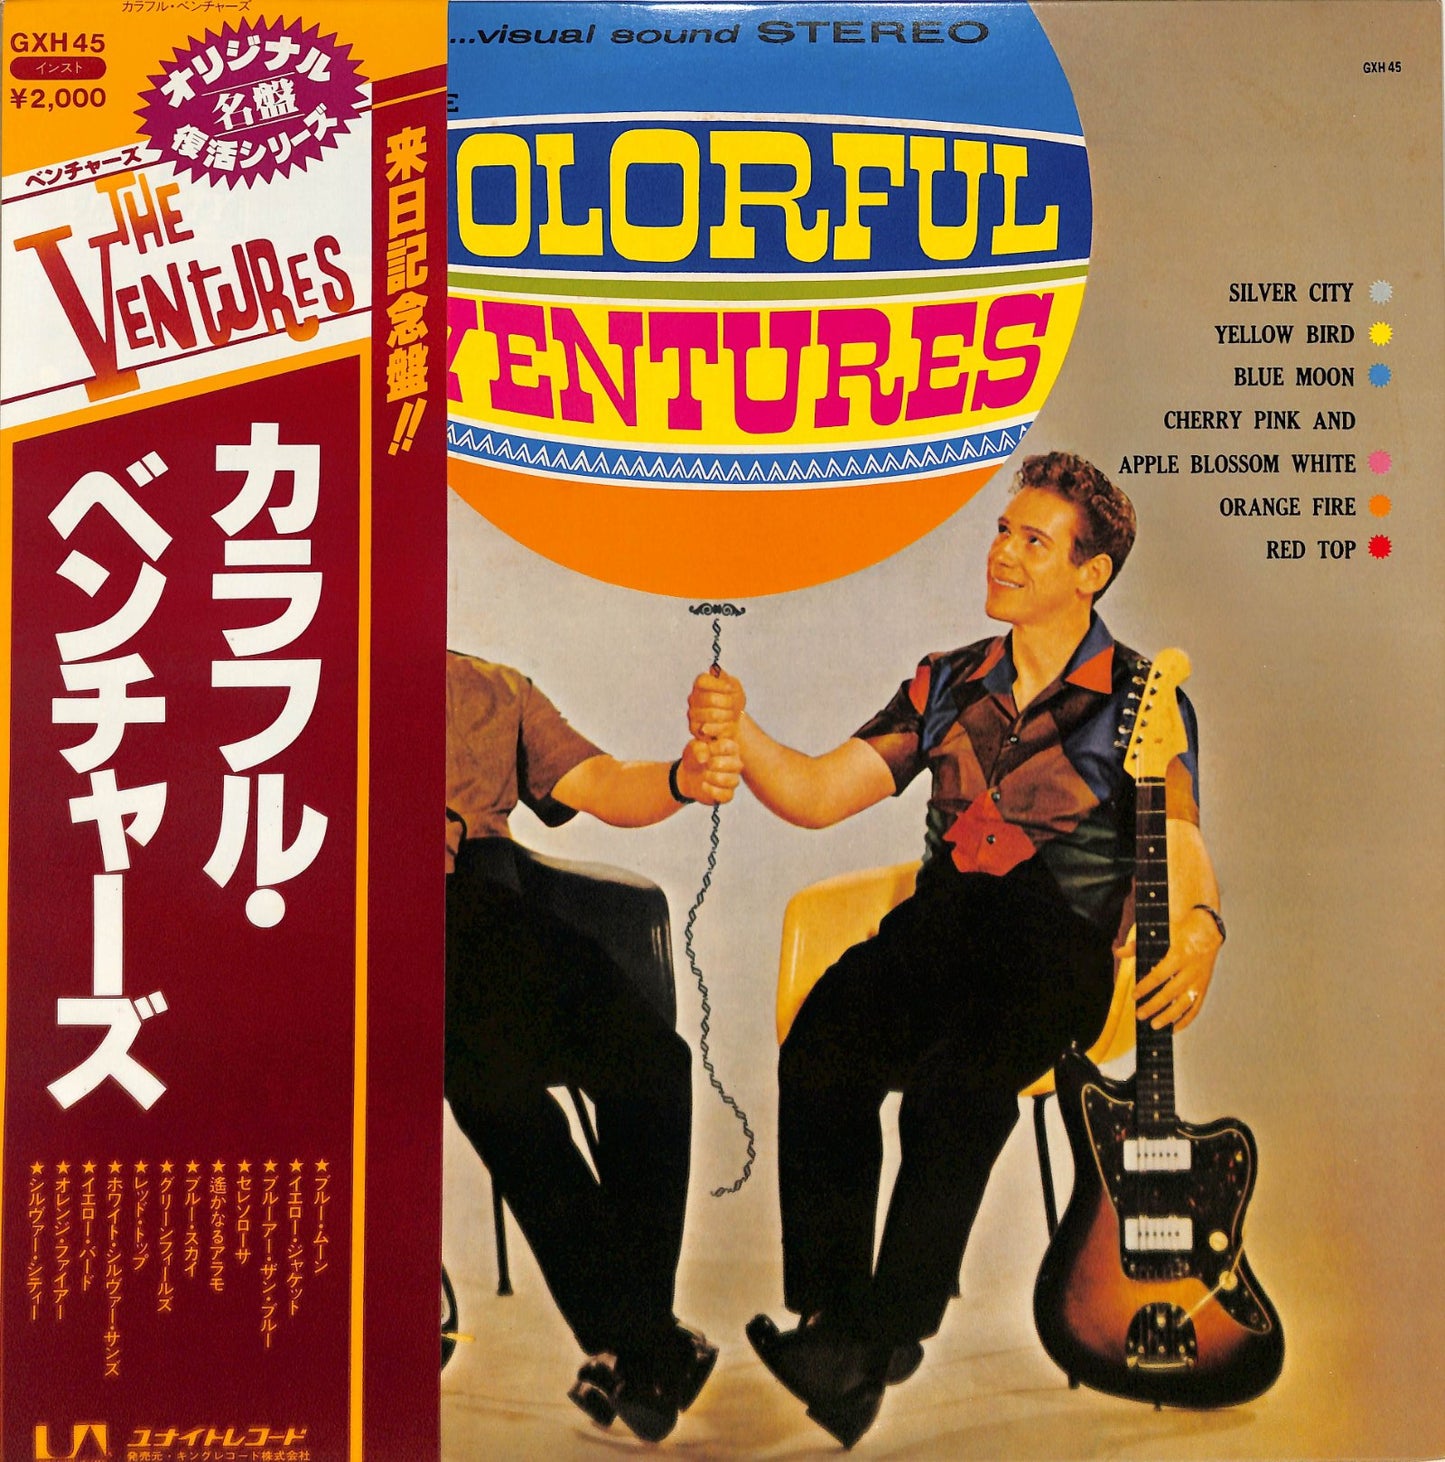 THE VENTURES - The Colorful Ventures